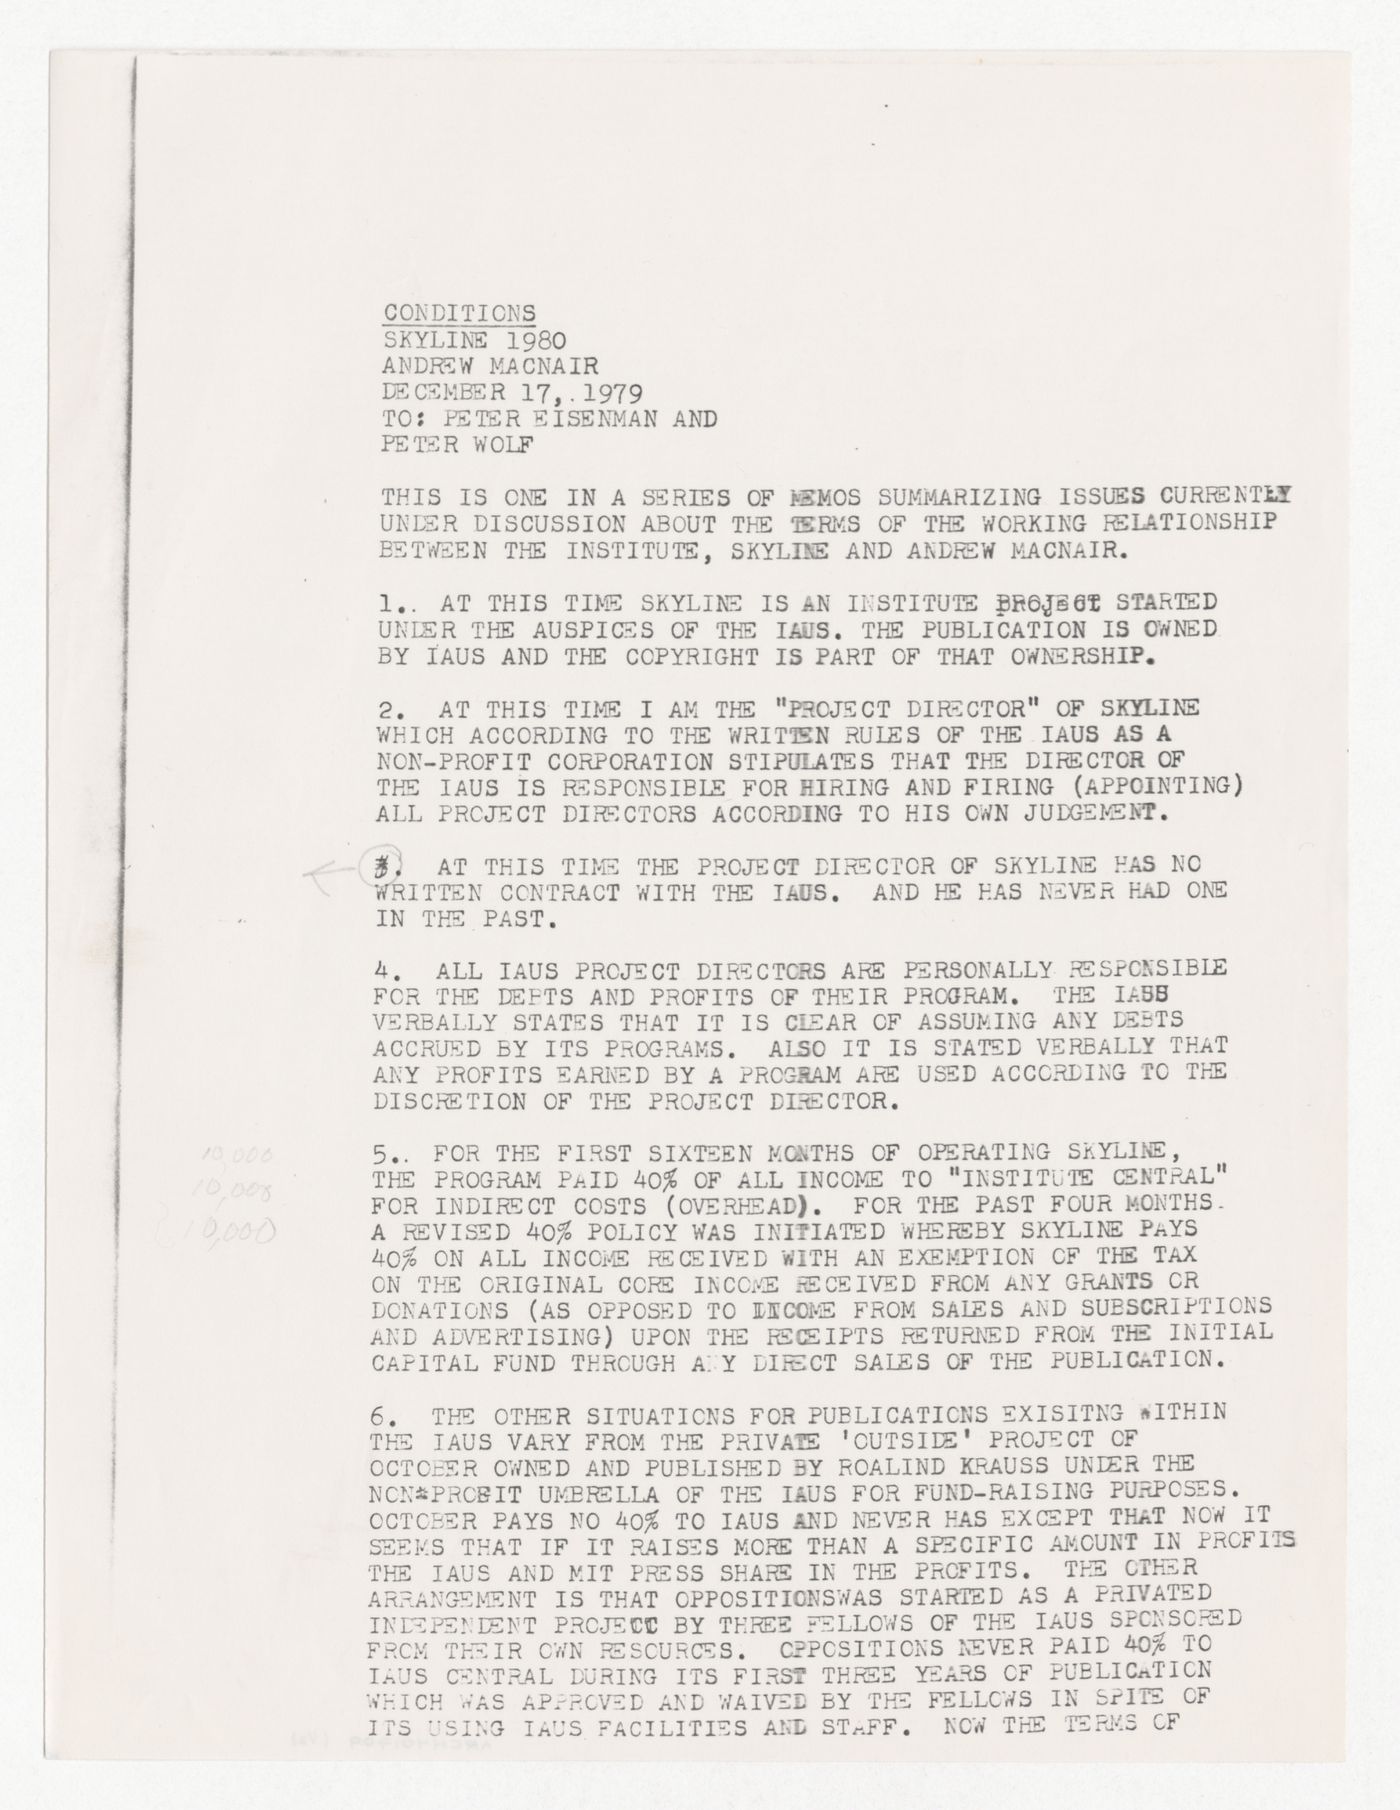 Memorandum from Andrew MacNair to Peter D. Eisenman and Peter Wolf about the terms of the working relationship between IAUS, Skyline, and MacNair